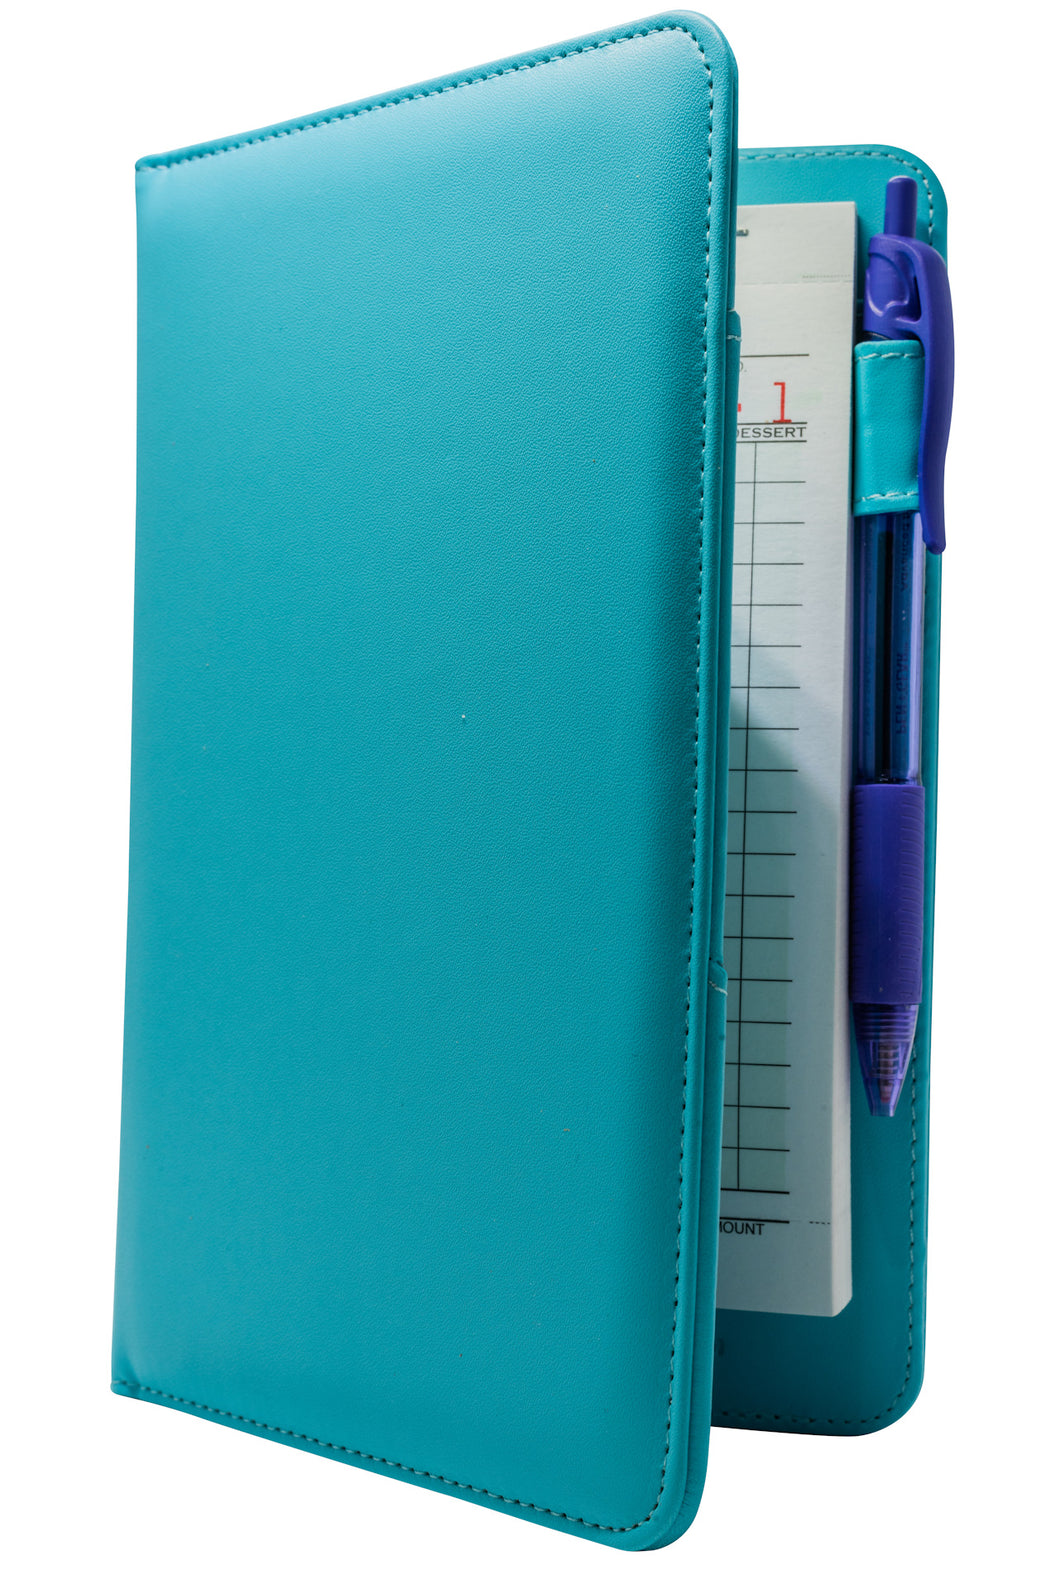 Turquoise Server Book with Purple Pen - Cute Colorful Waitress Organizer